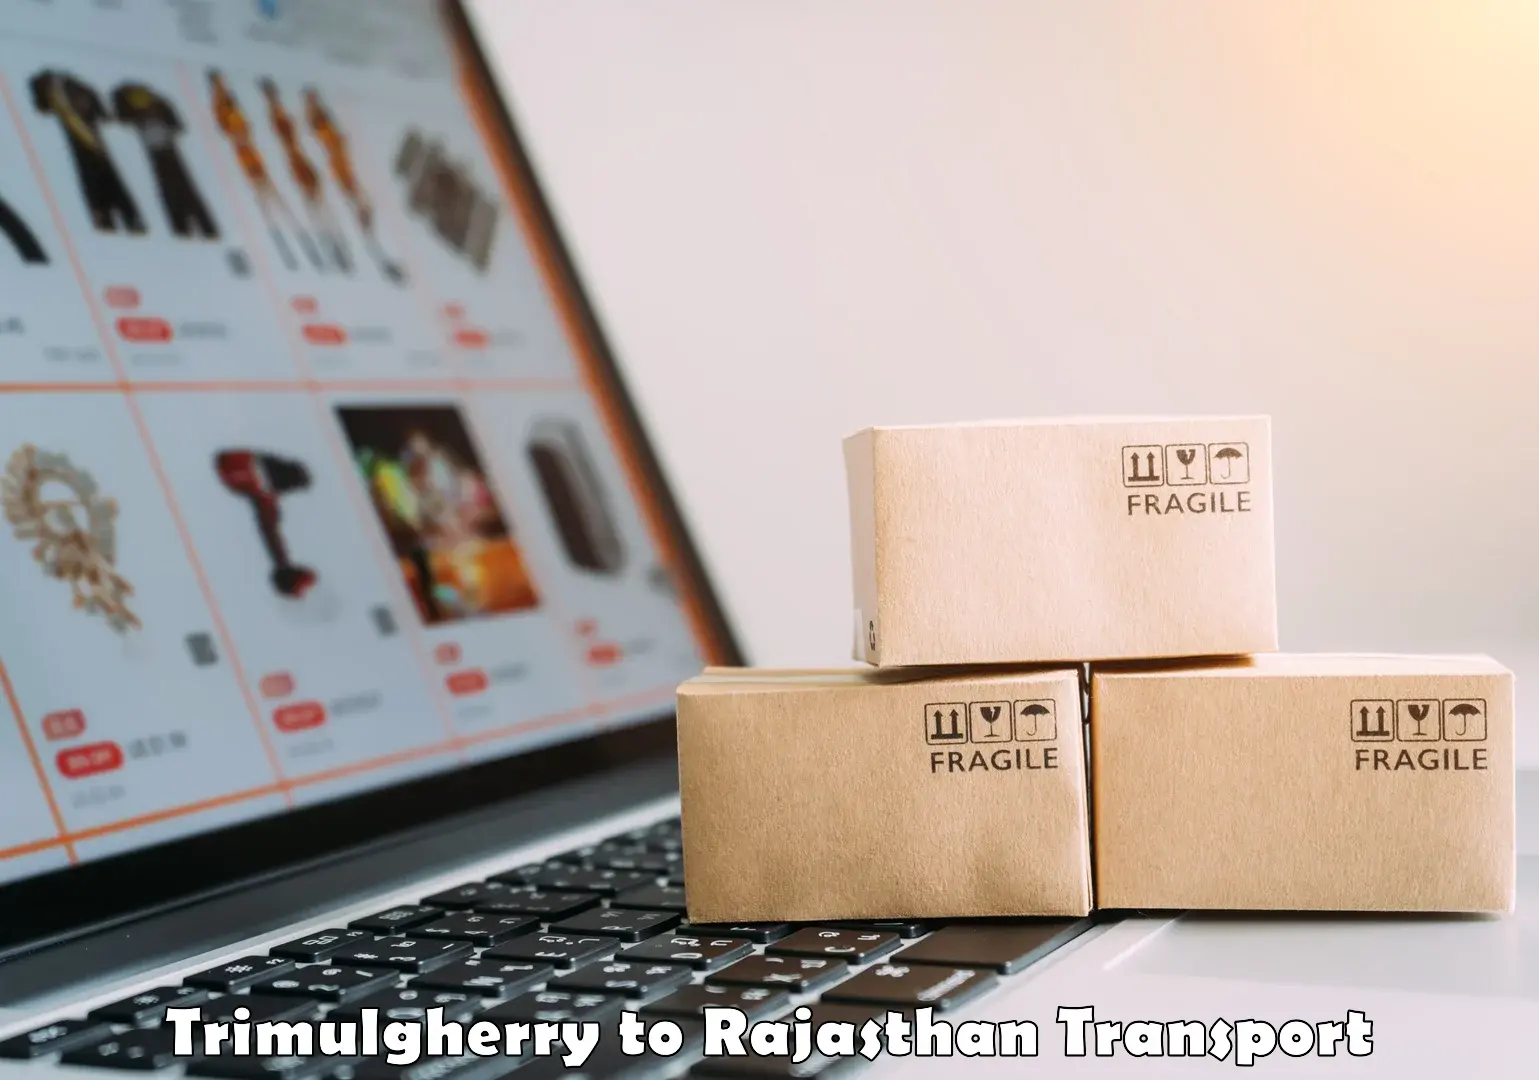 Furniture transport service Trimulgherry to Rajasthan